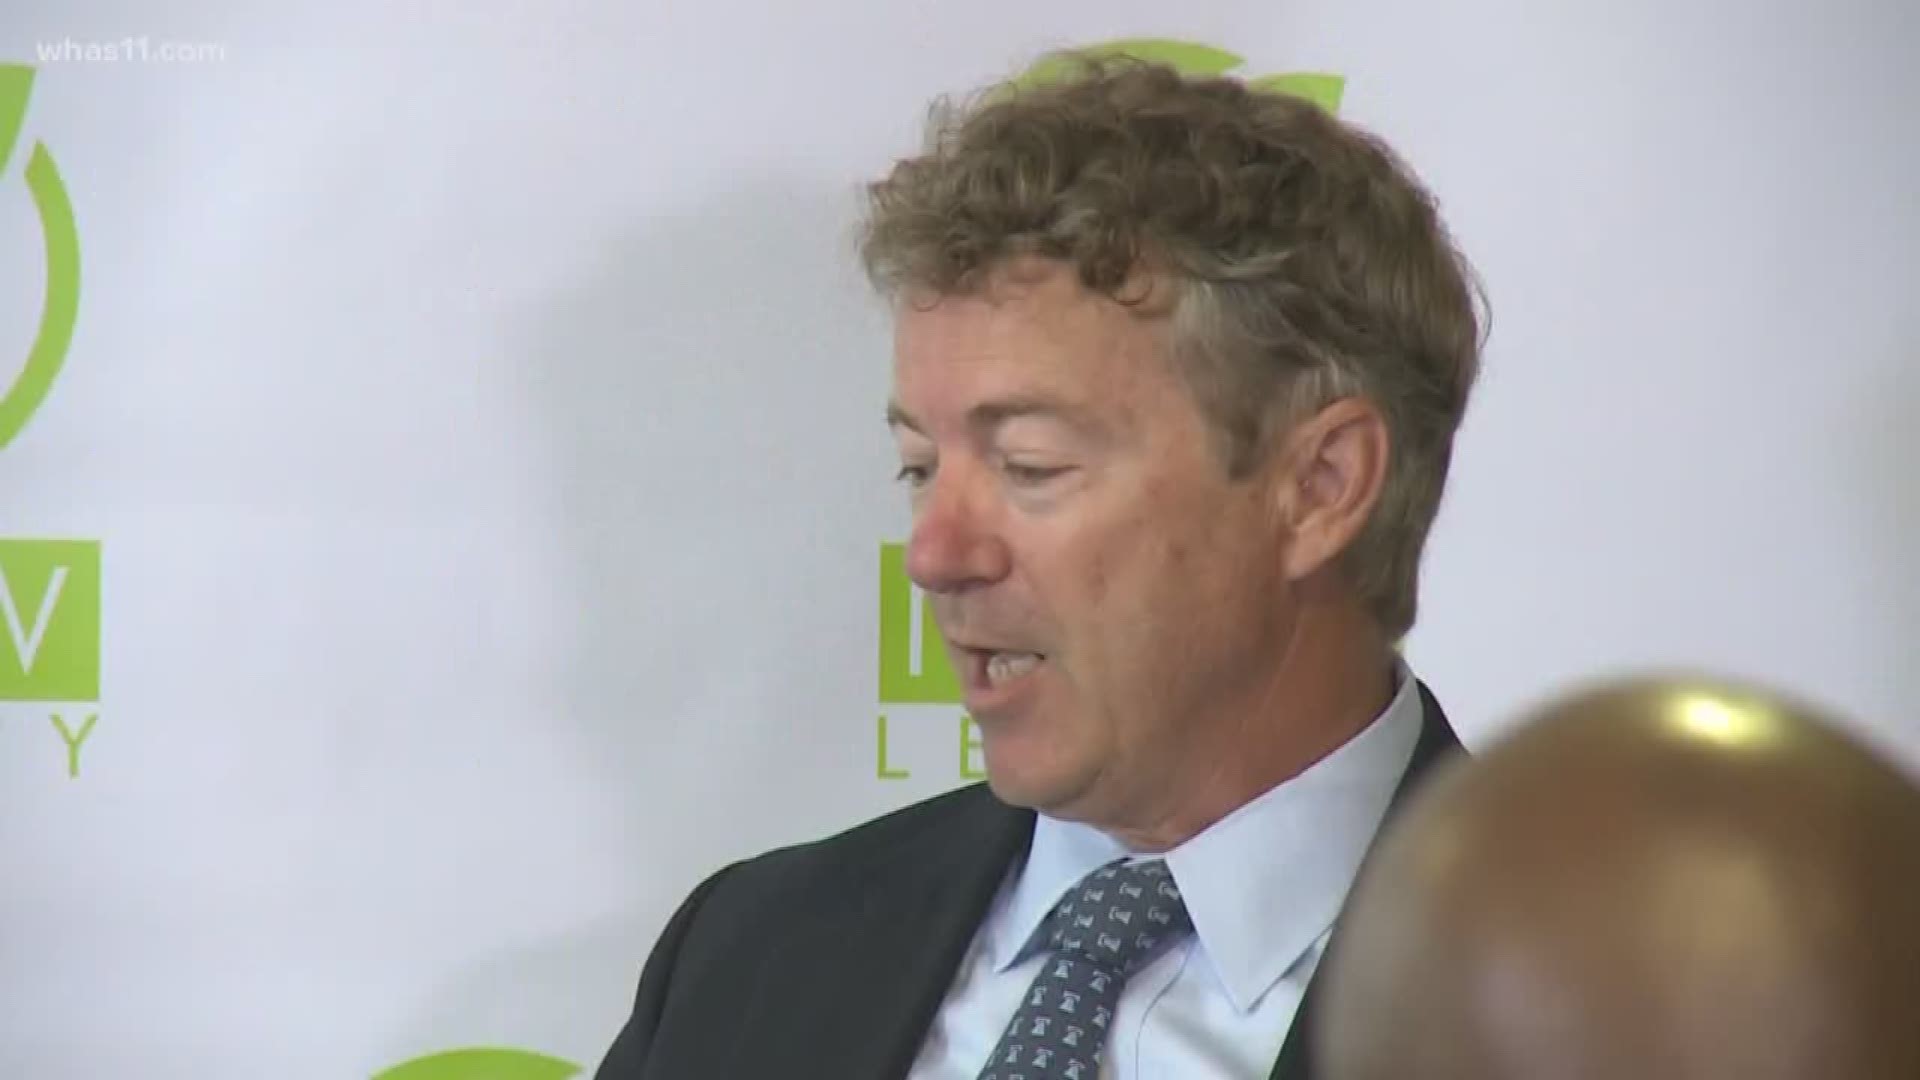 Reducing drug crime related sentences and restoring rights are hot topics for Criminal Justice Reform and topics on Senator Rand Paul's agenda.